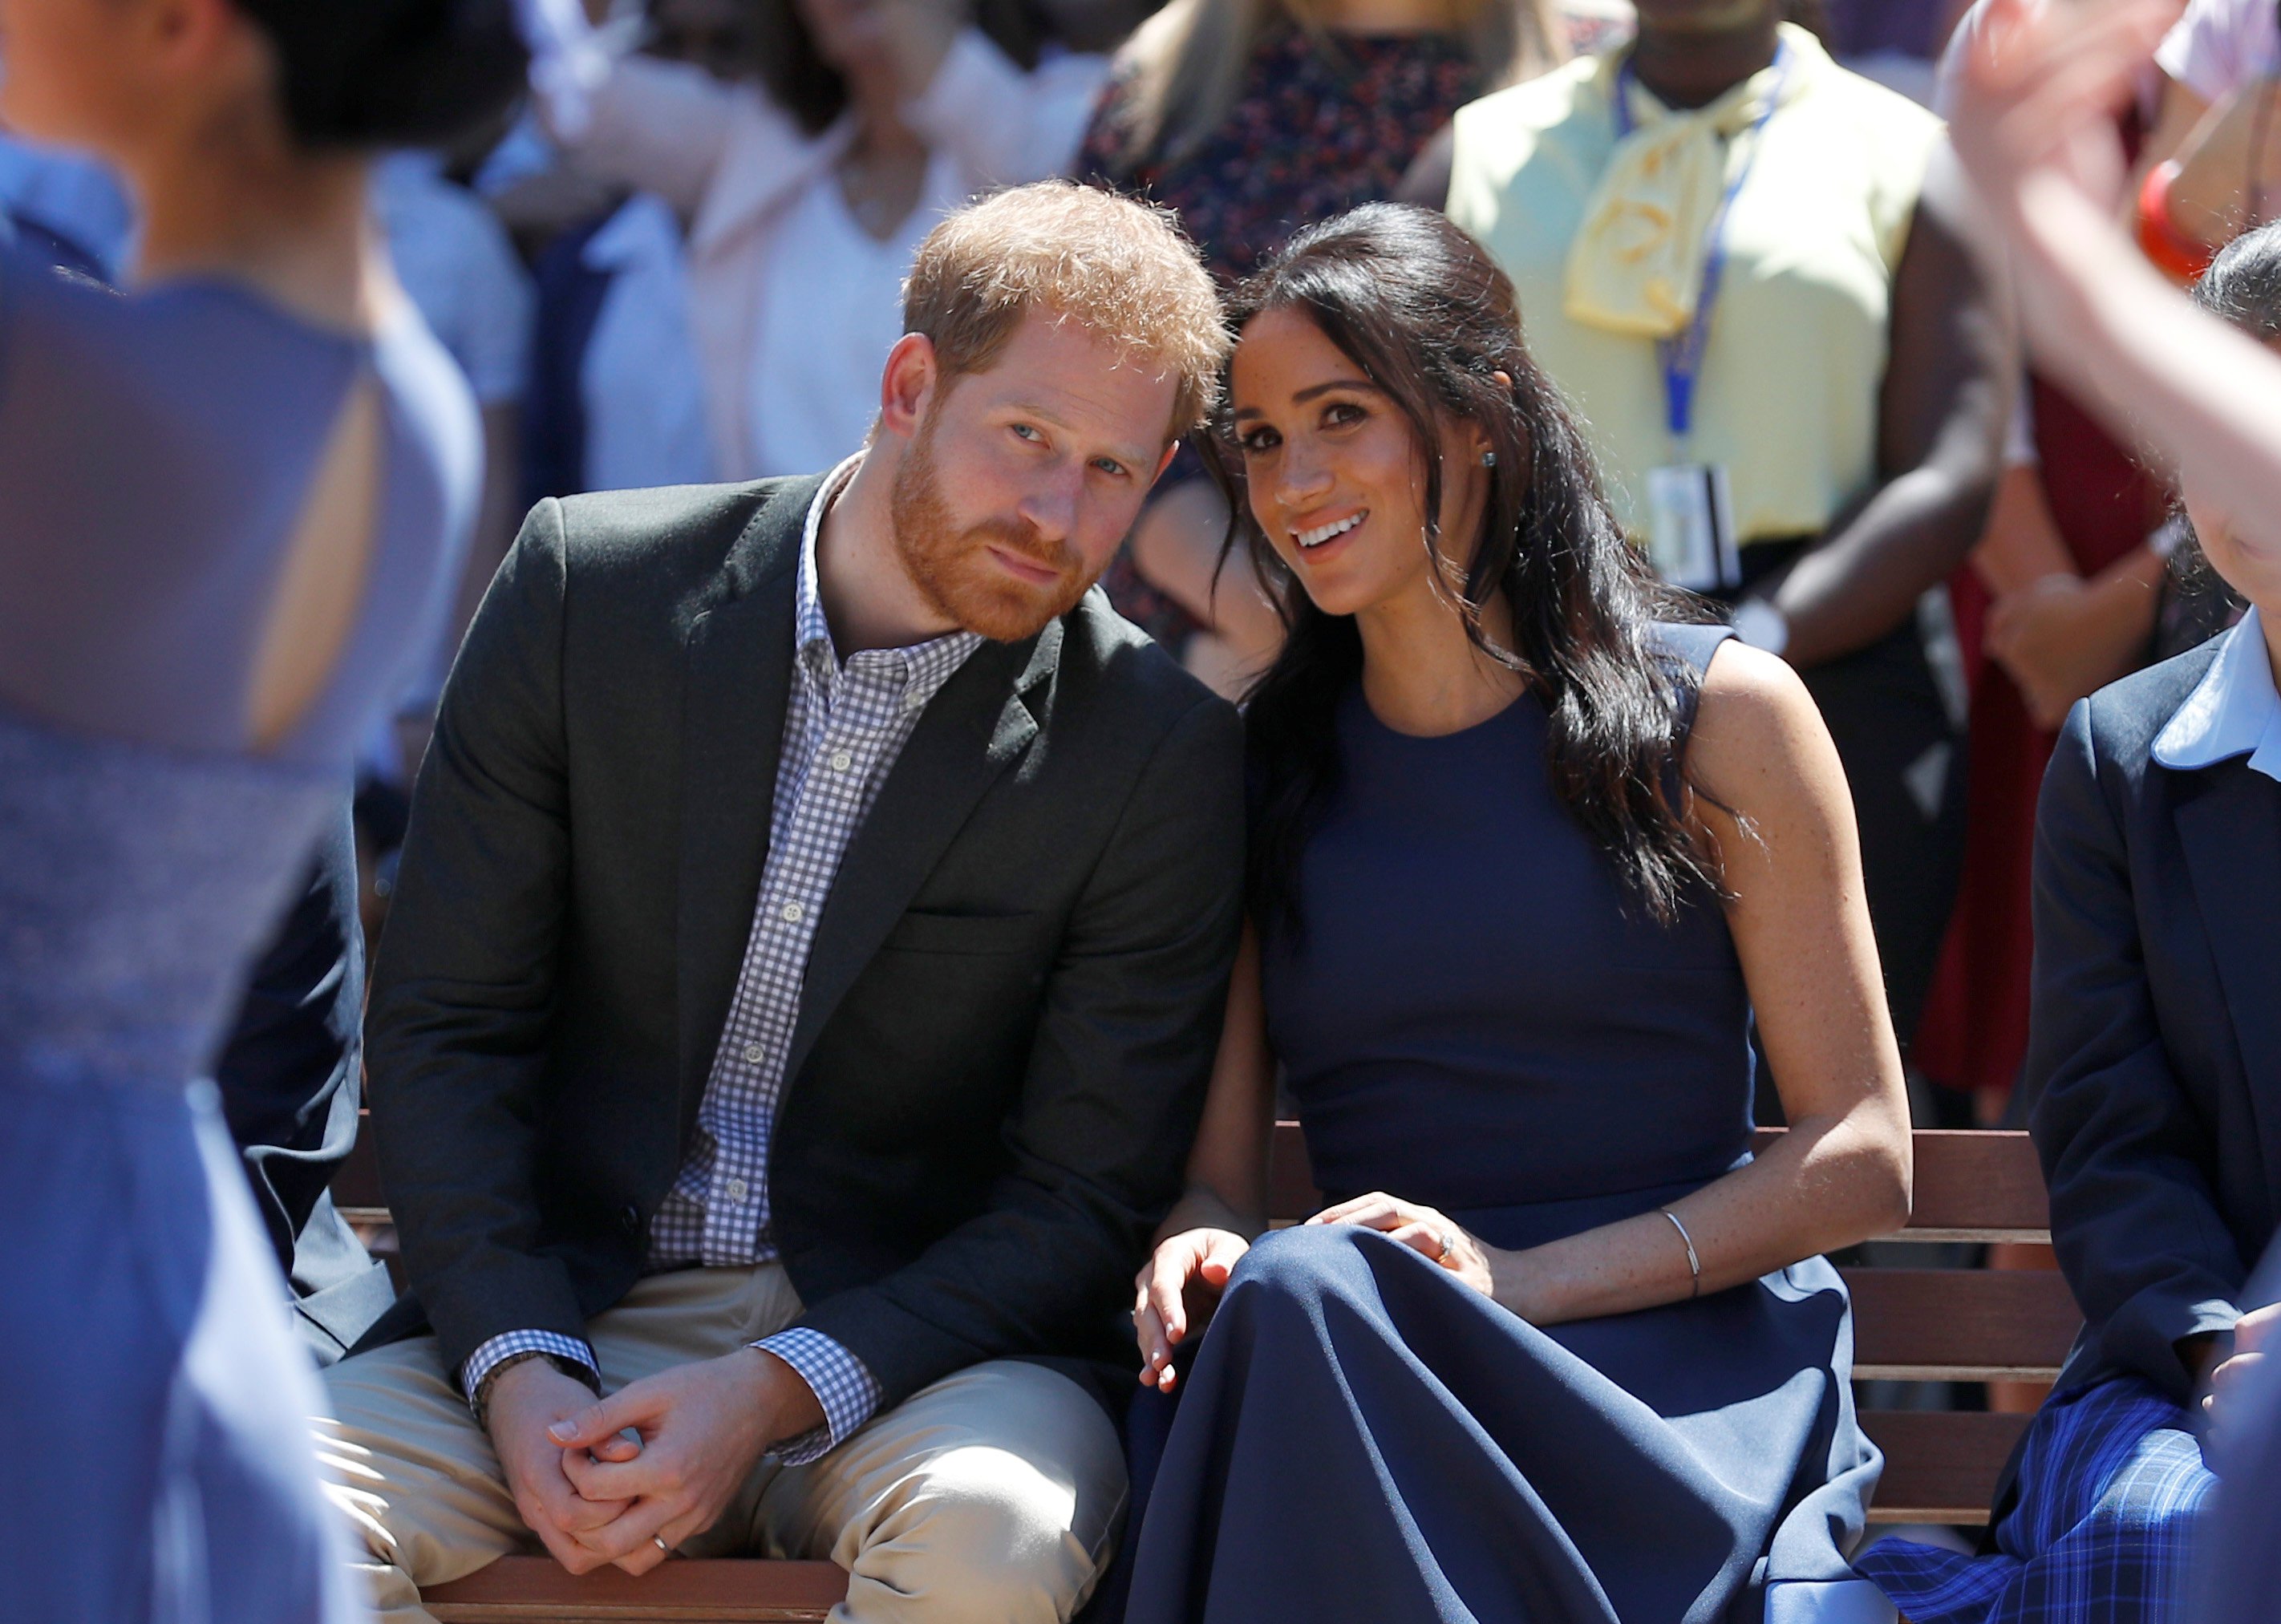 Why the Royal Family Isn’t Responding to Prince Harry and Meghan Markle According to a Commentator